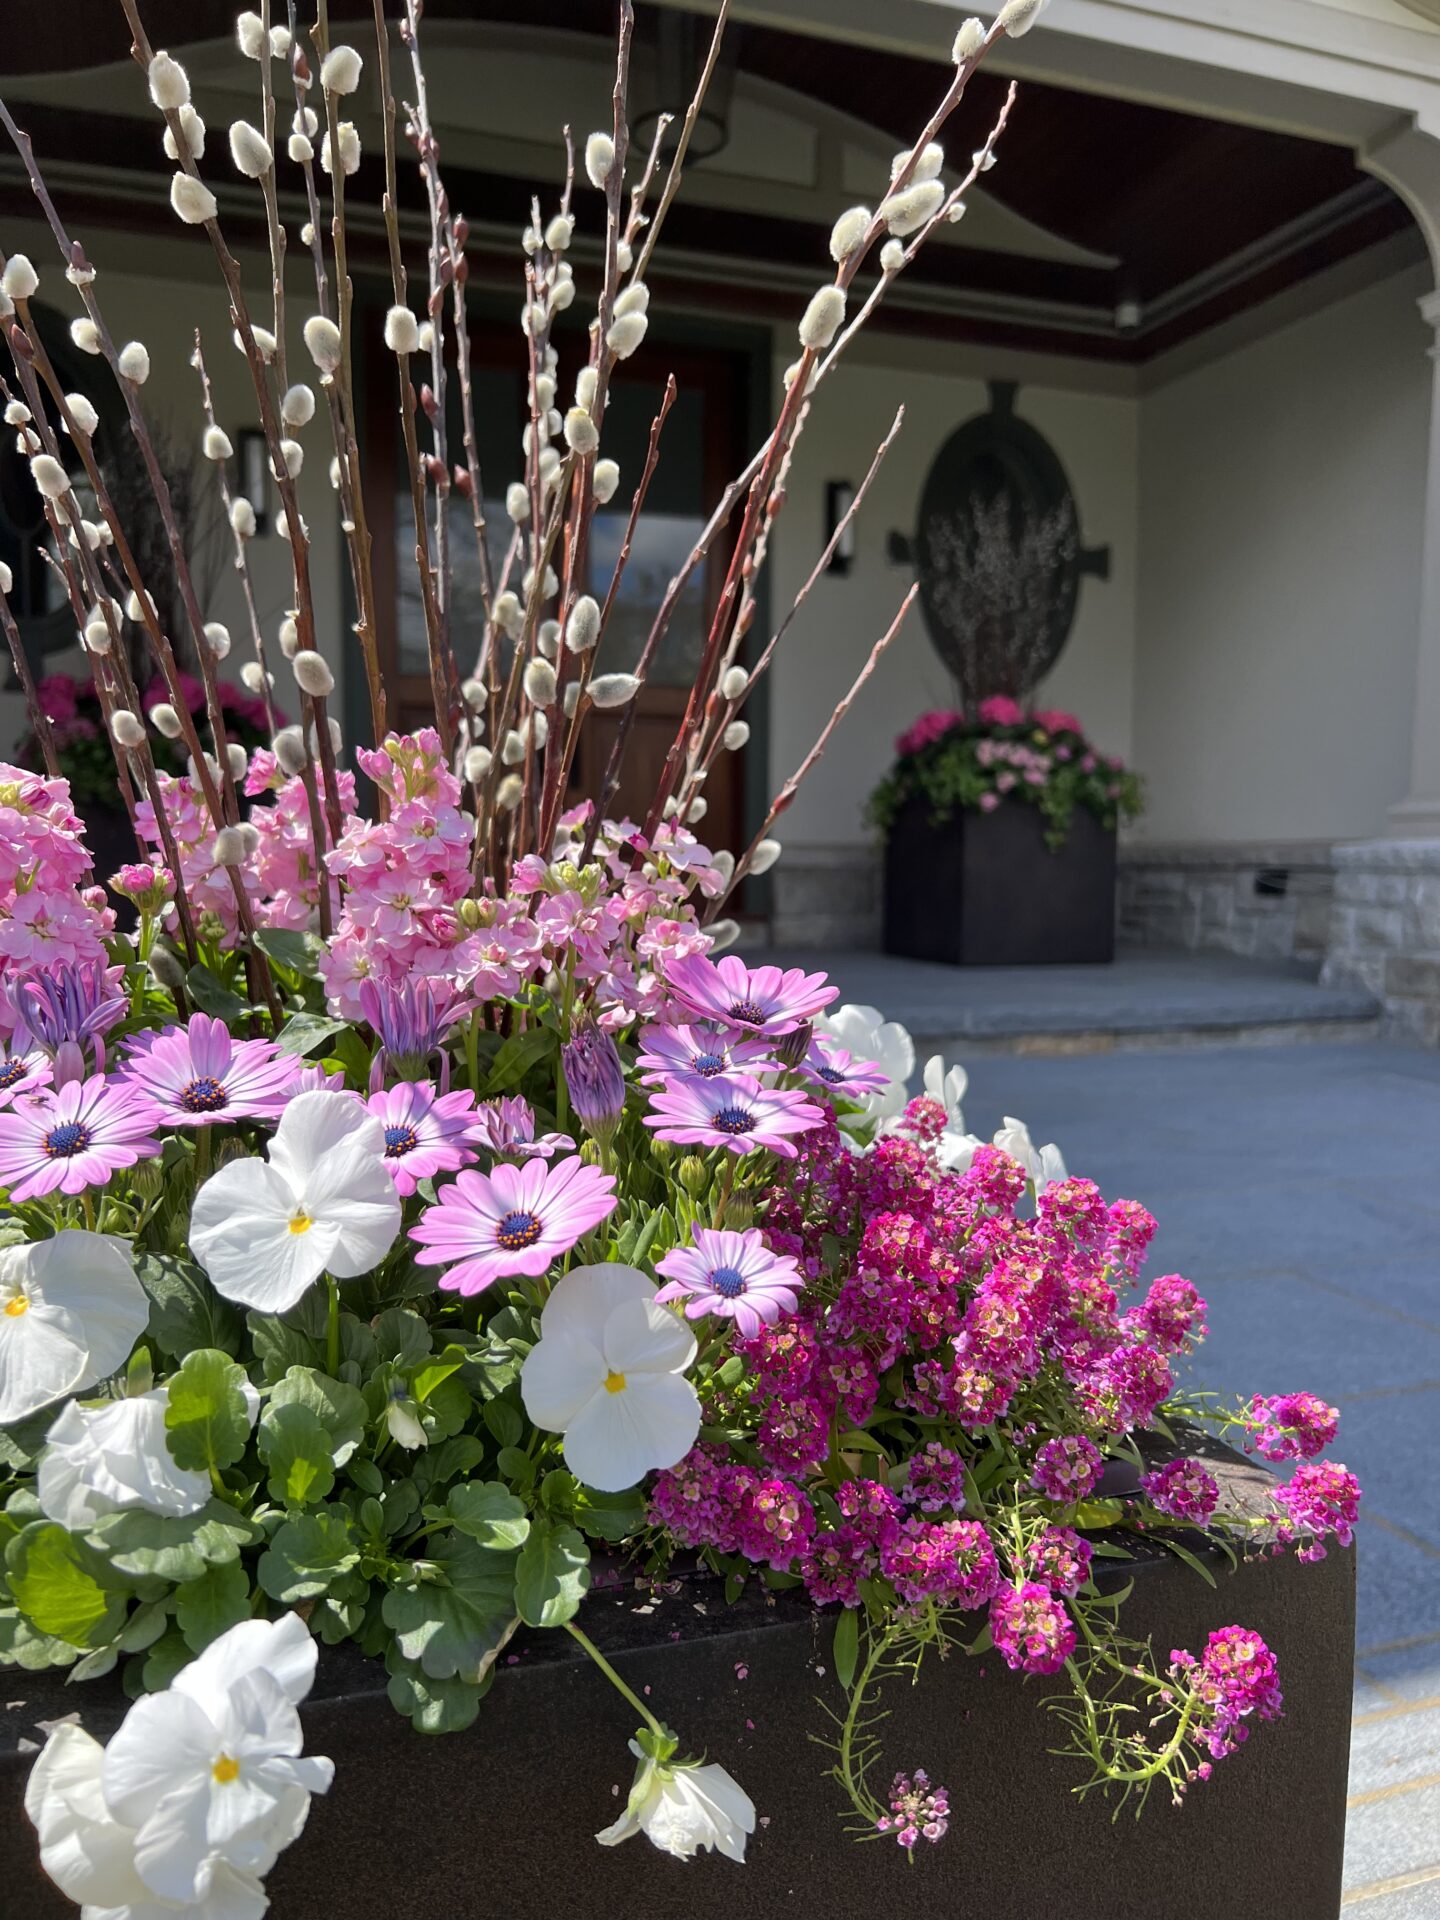 A vibrant flower arrangement with pink and white blossoms, displayed in a planter, with a blurred background featuring an outdoor porch and sculptural art.